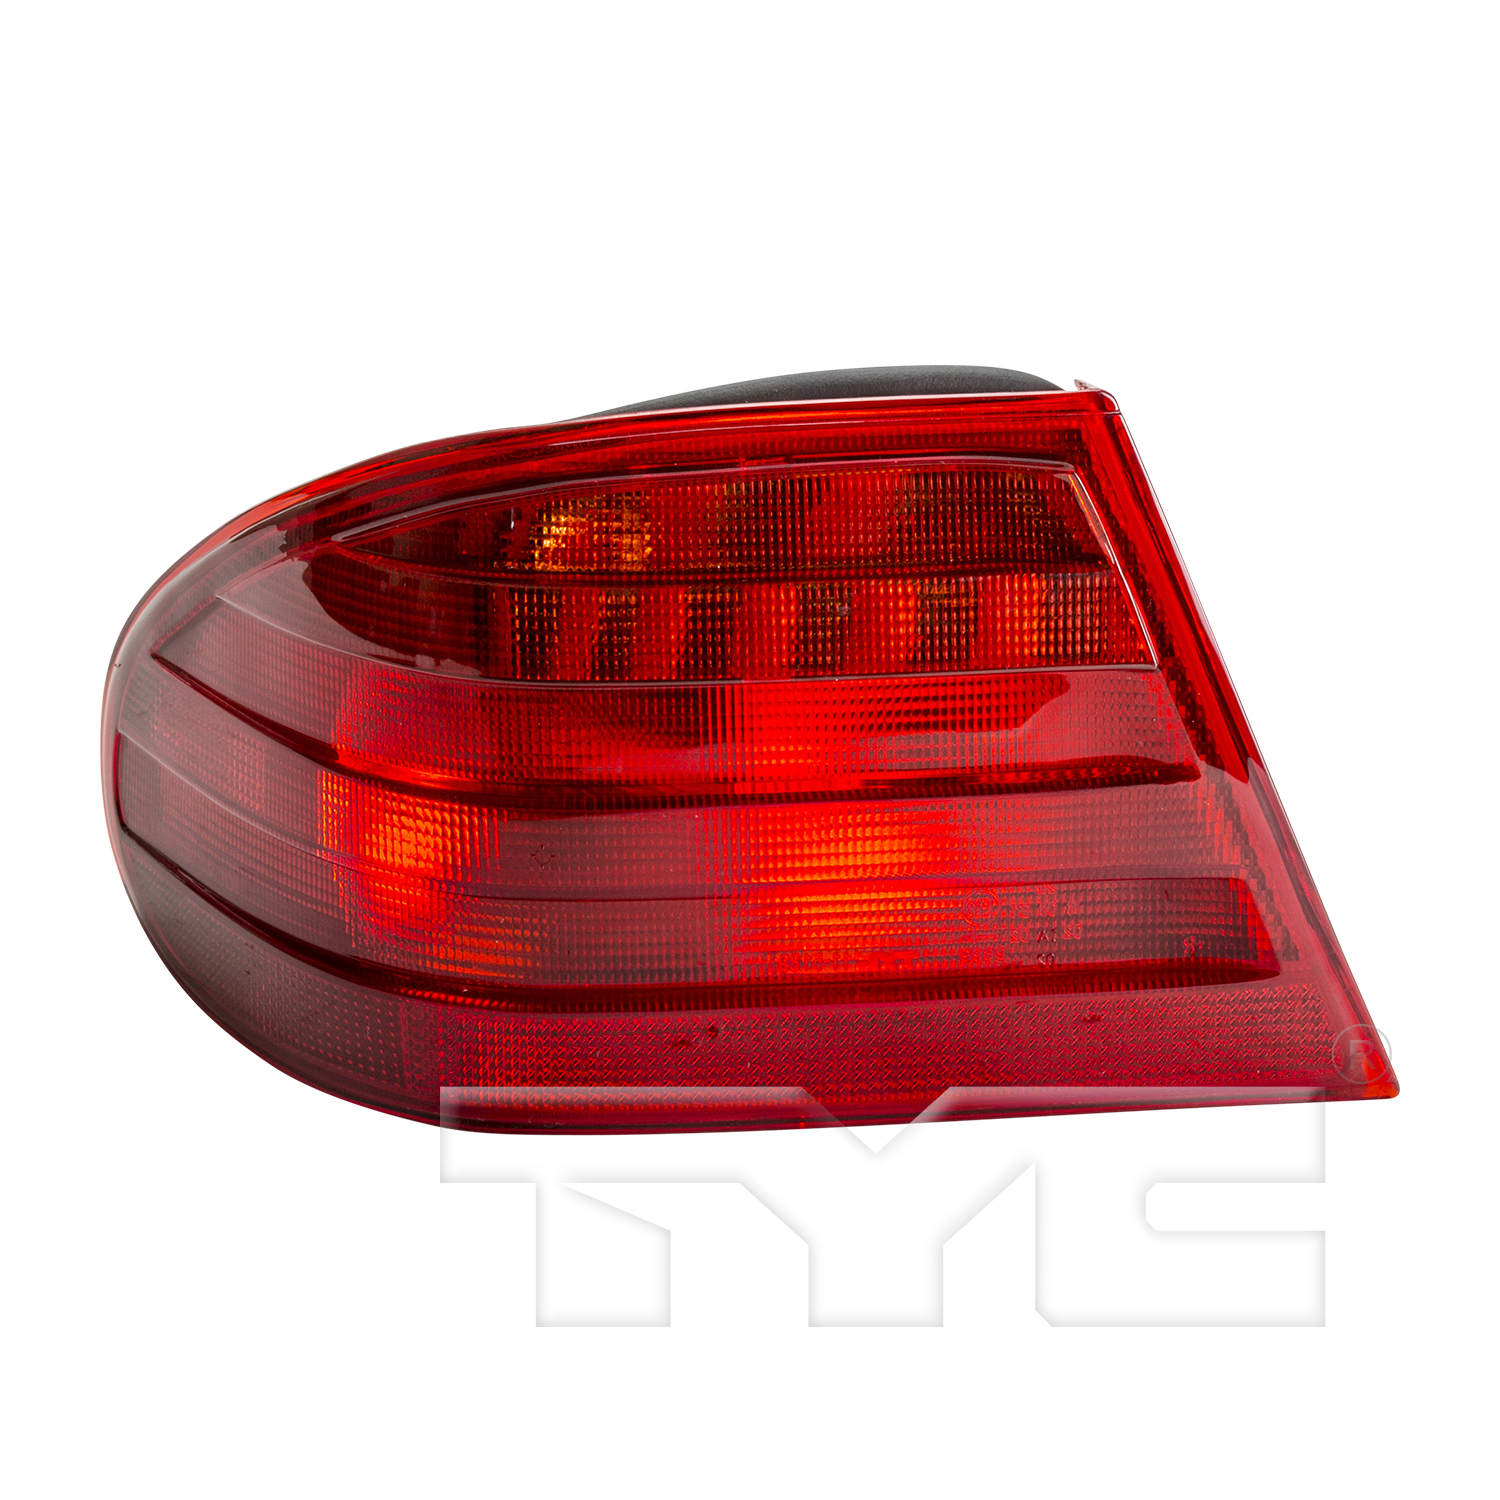 Aftermarket TAILLIGHTS for MERCEDES-BENZ - E300, E300,95-99,LT Taillamp assy outer